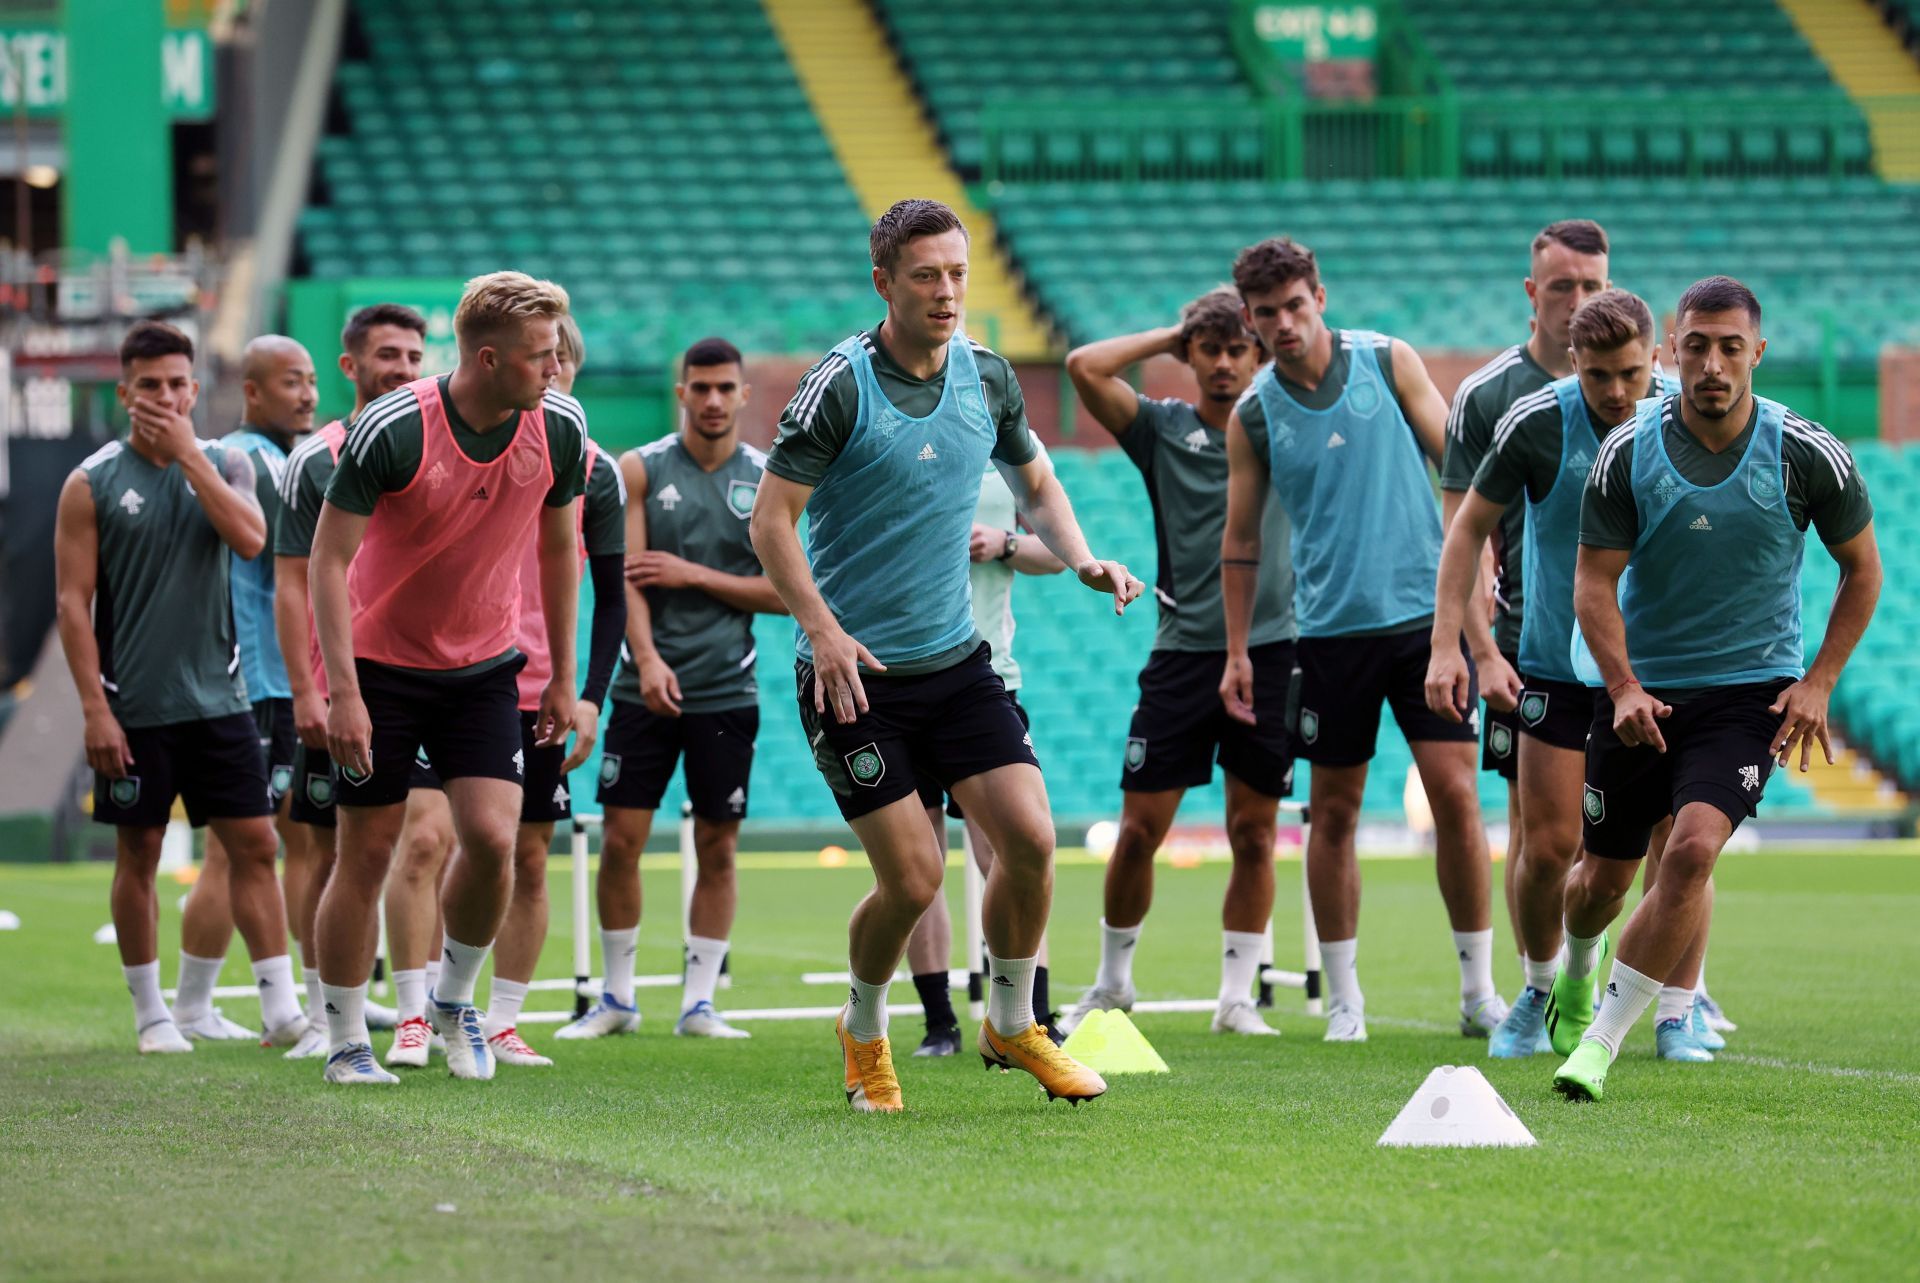 The Hoops play their last friendly before starting the new league season.